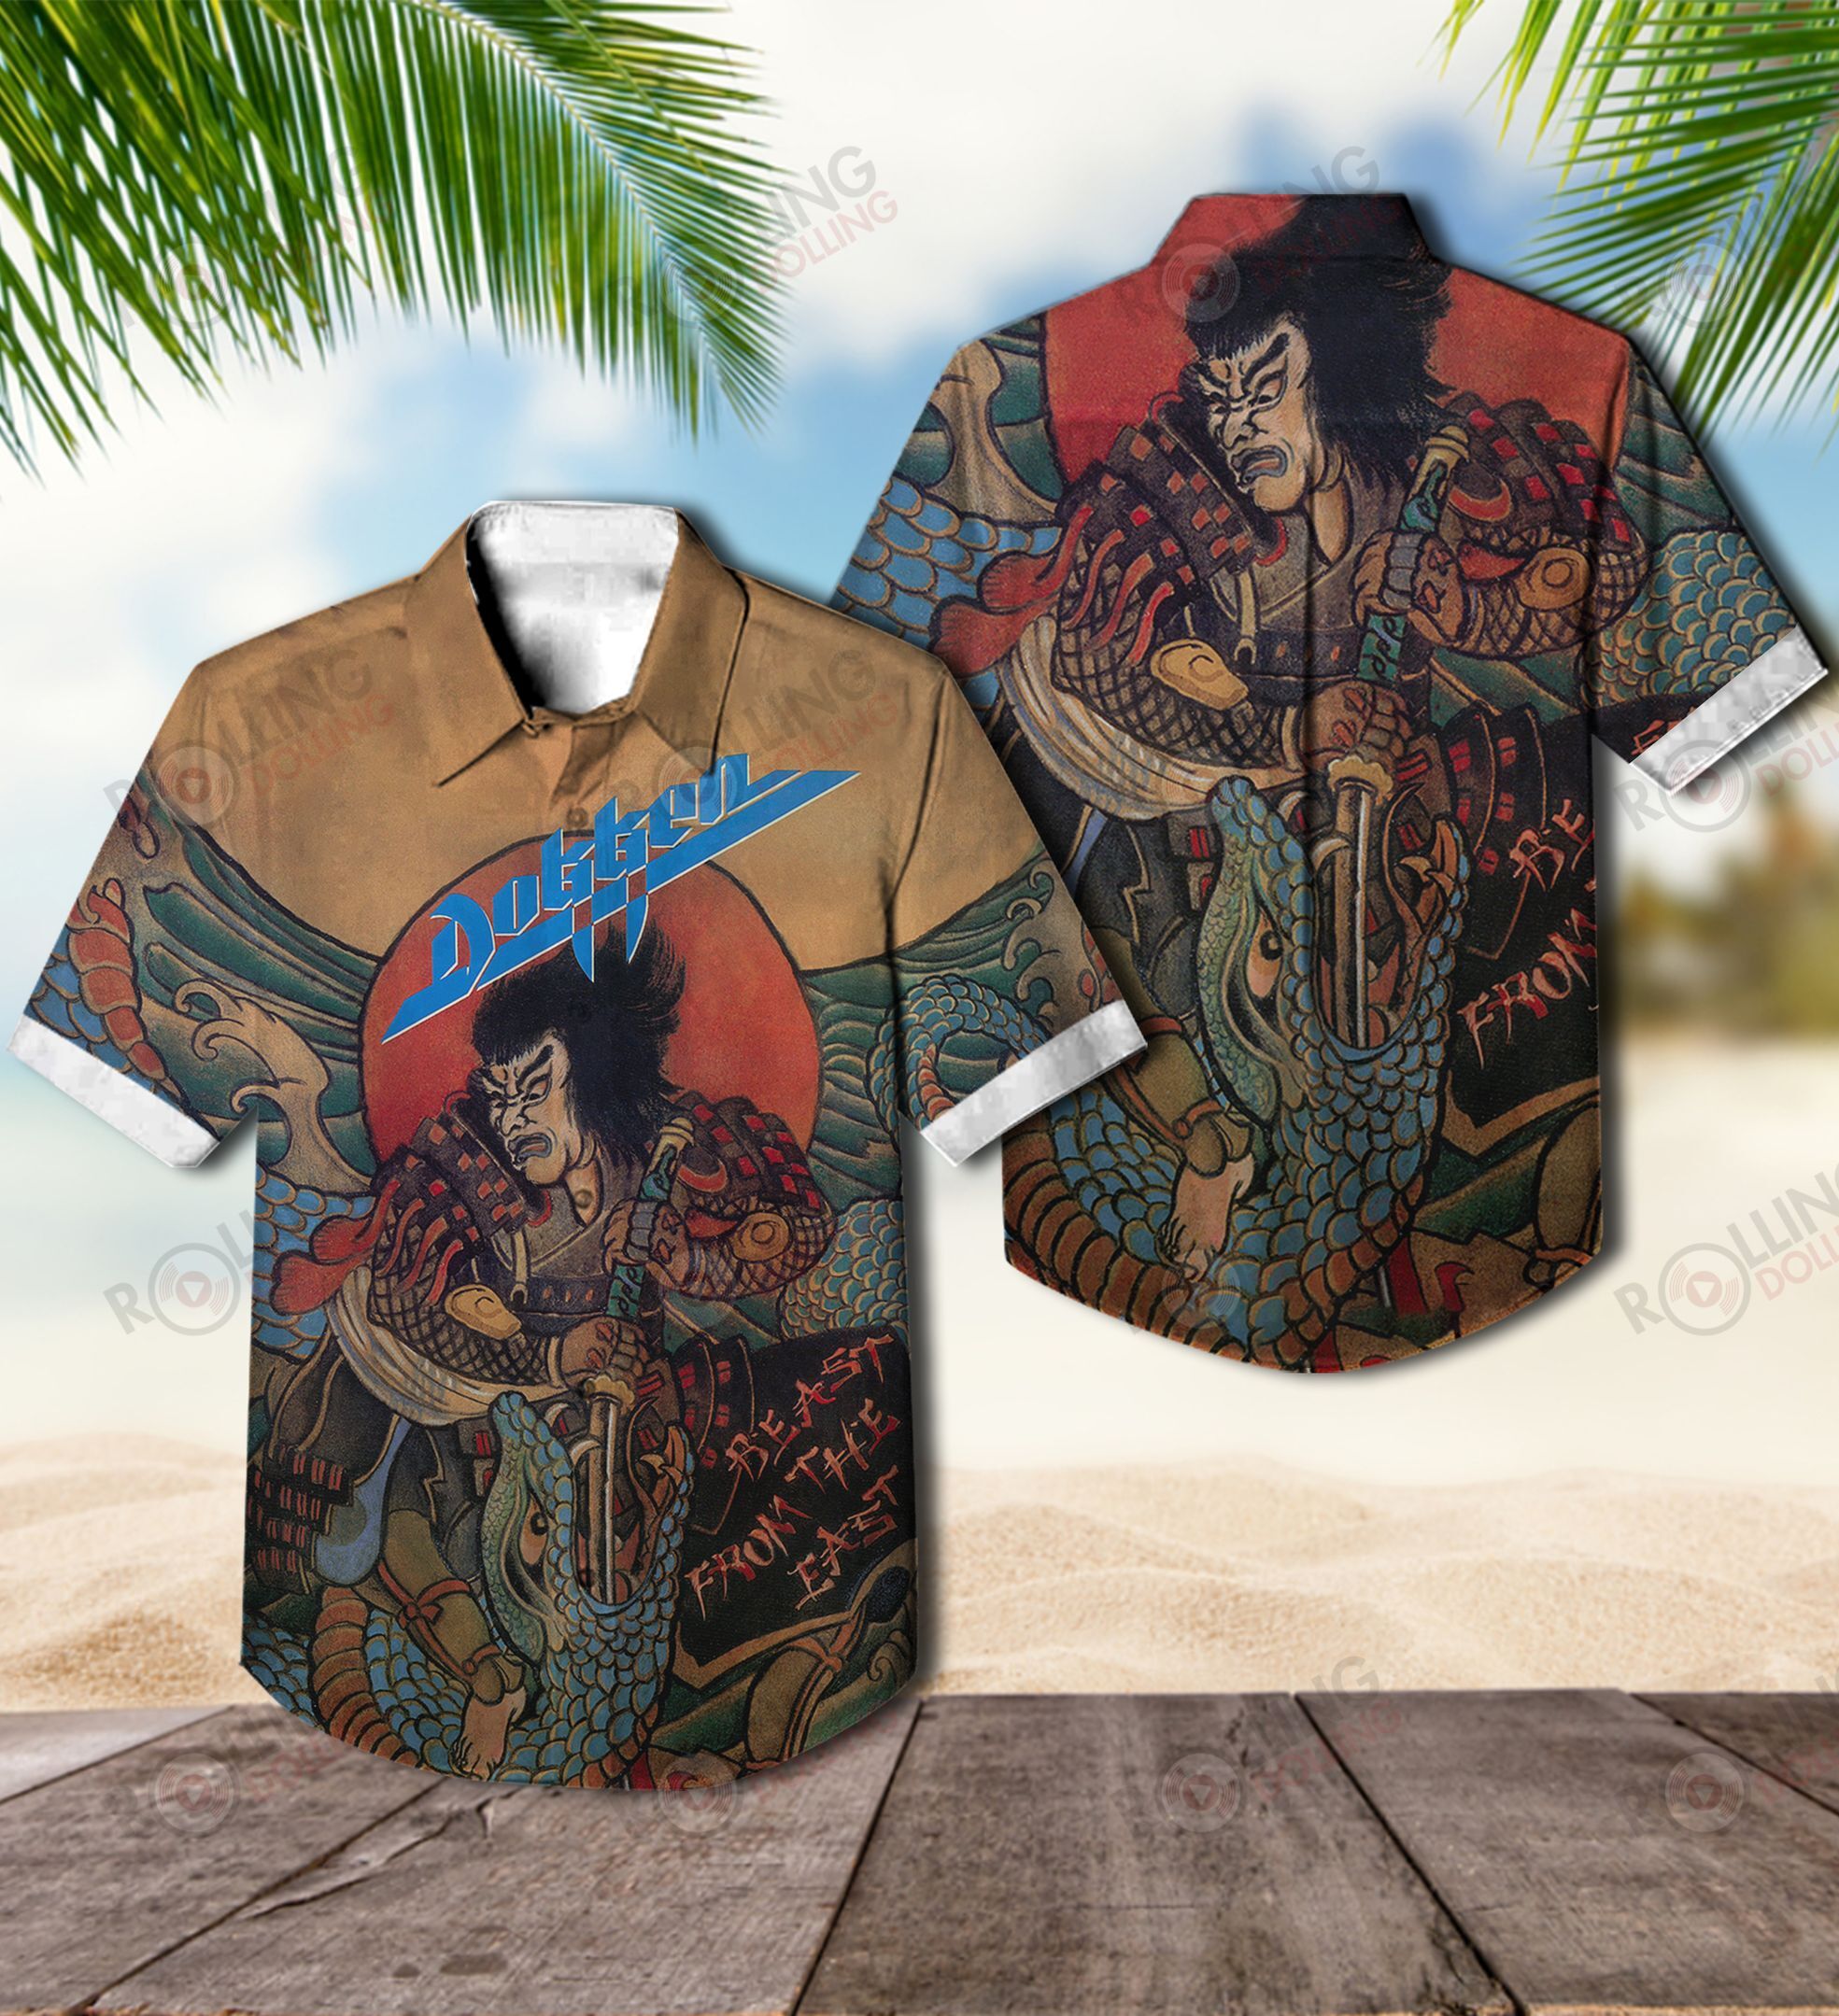 This would make a great gift for any fan who loves Hawaiian Shirt as well as Rock band 141